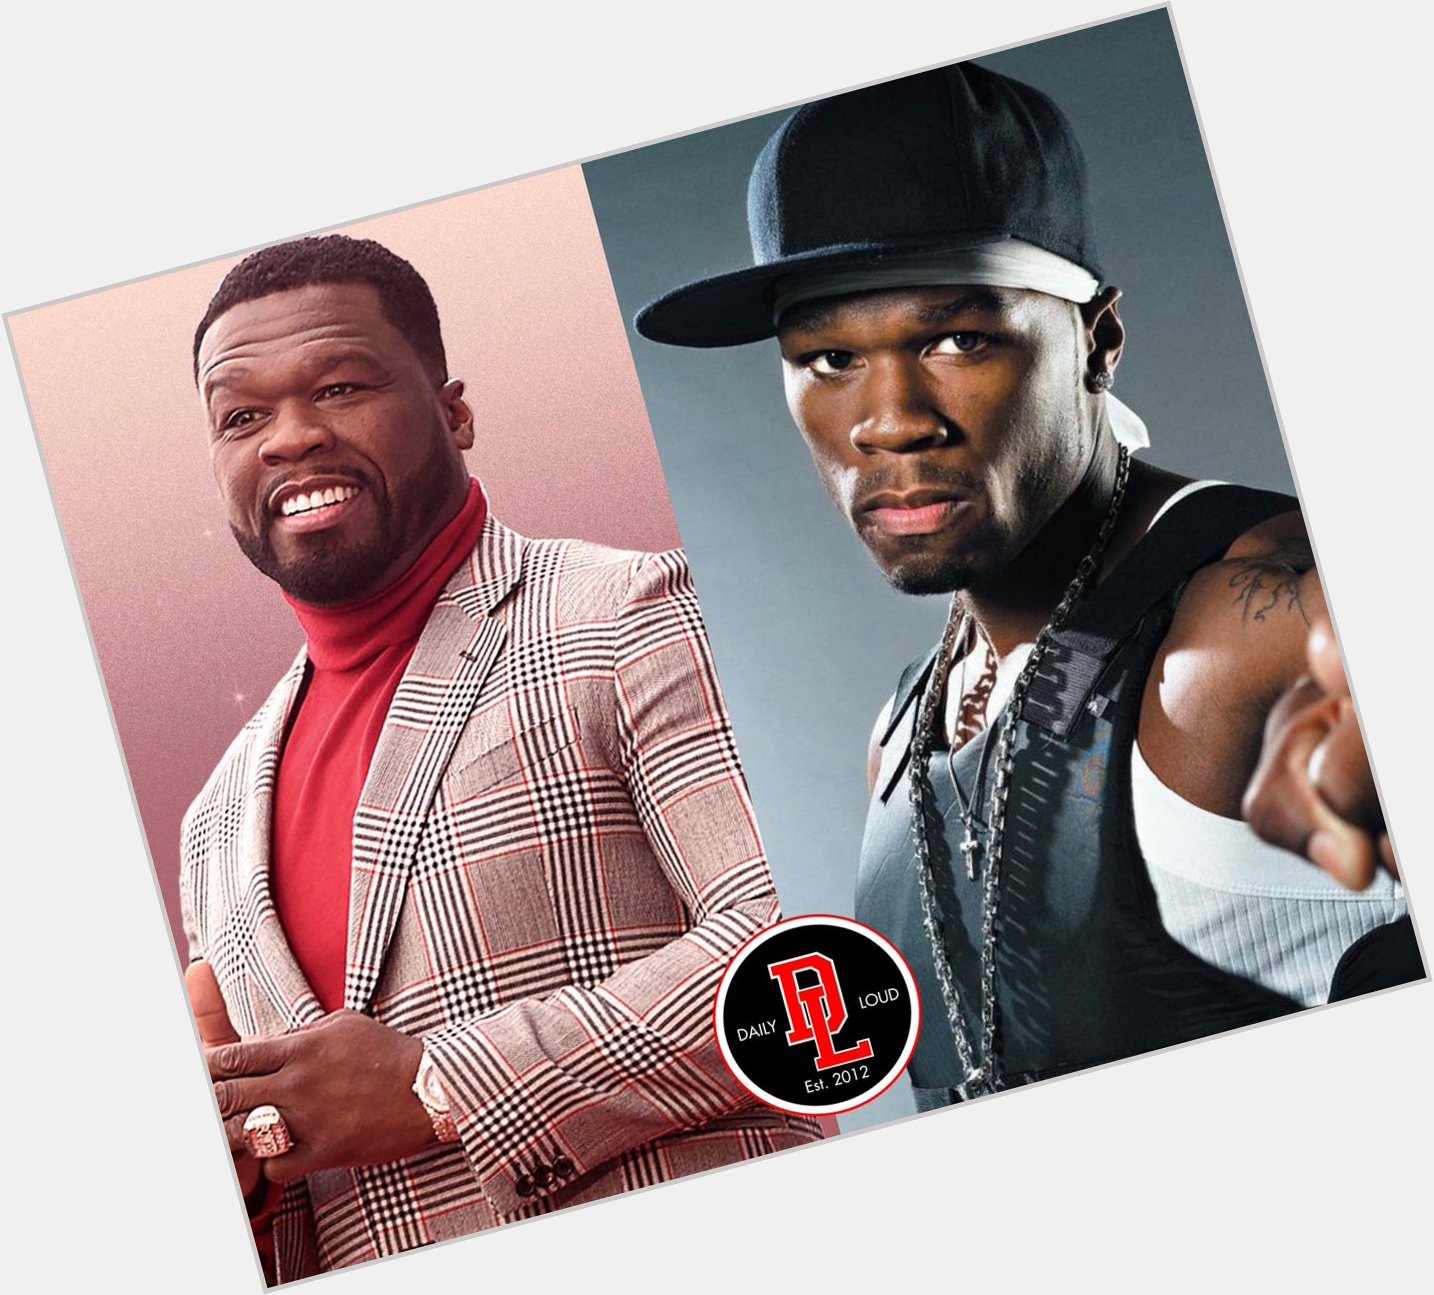 Happy birthday to 50 Cent! Today the legendary rapper turns 47 years old  